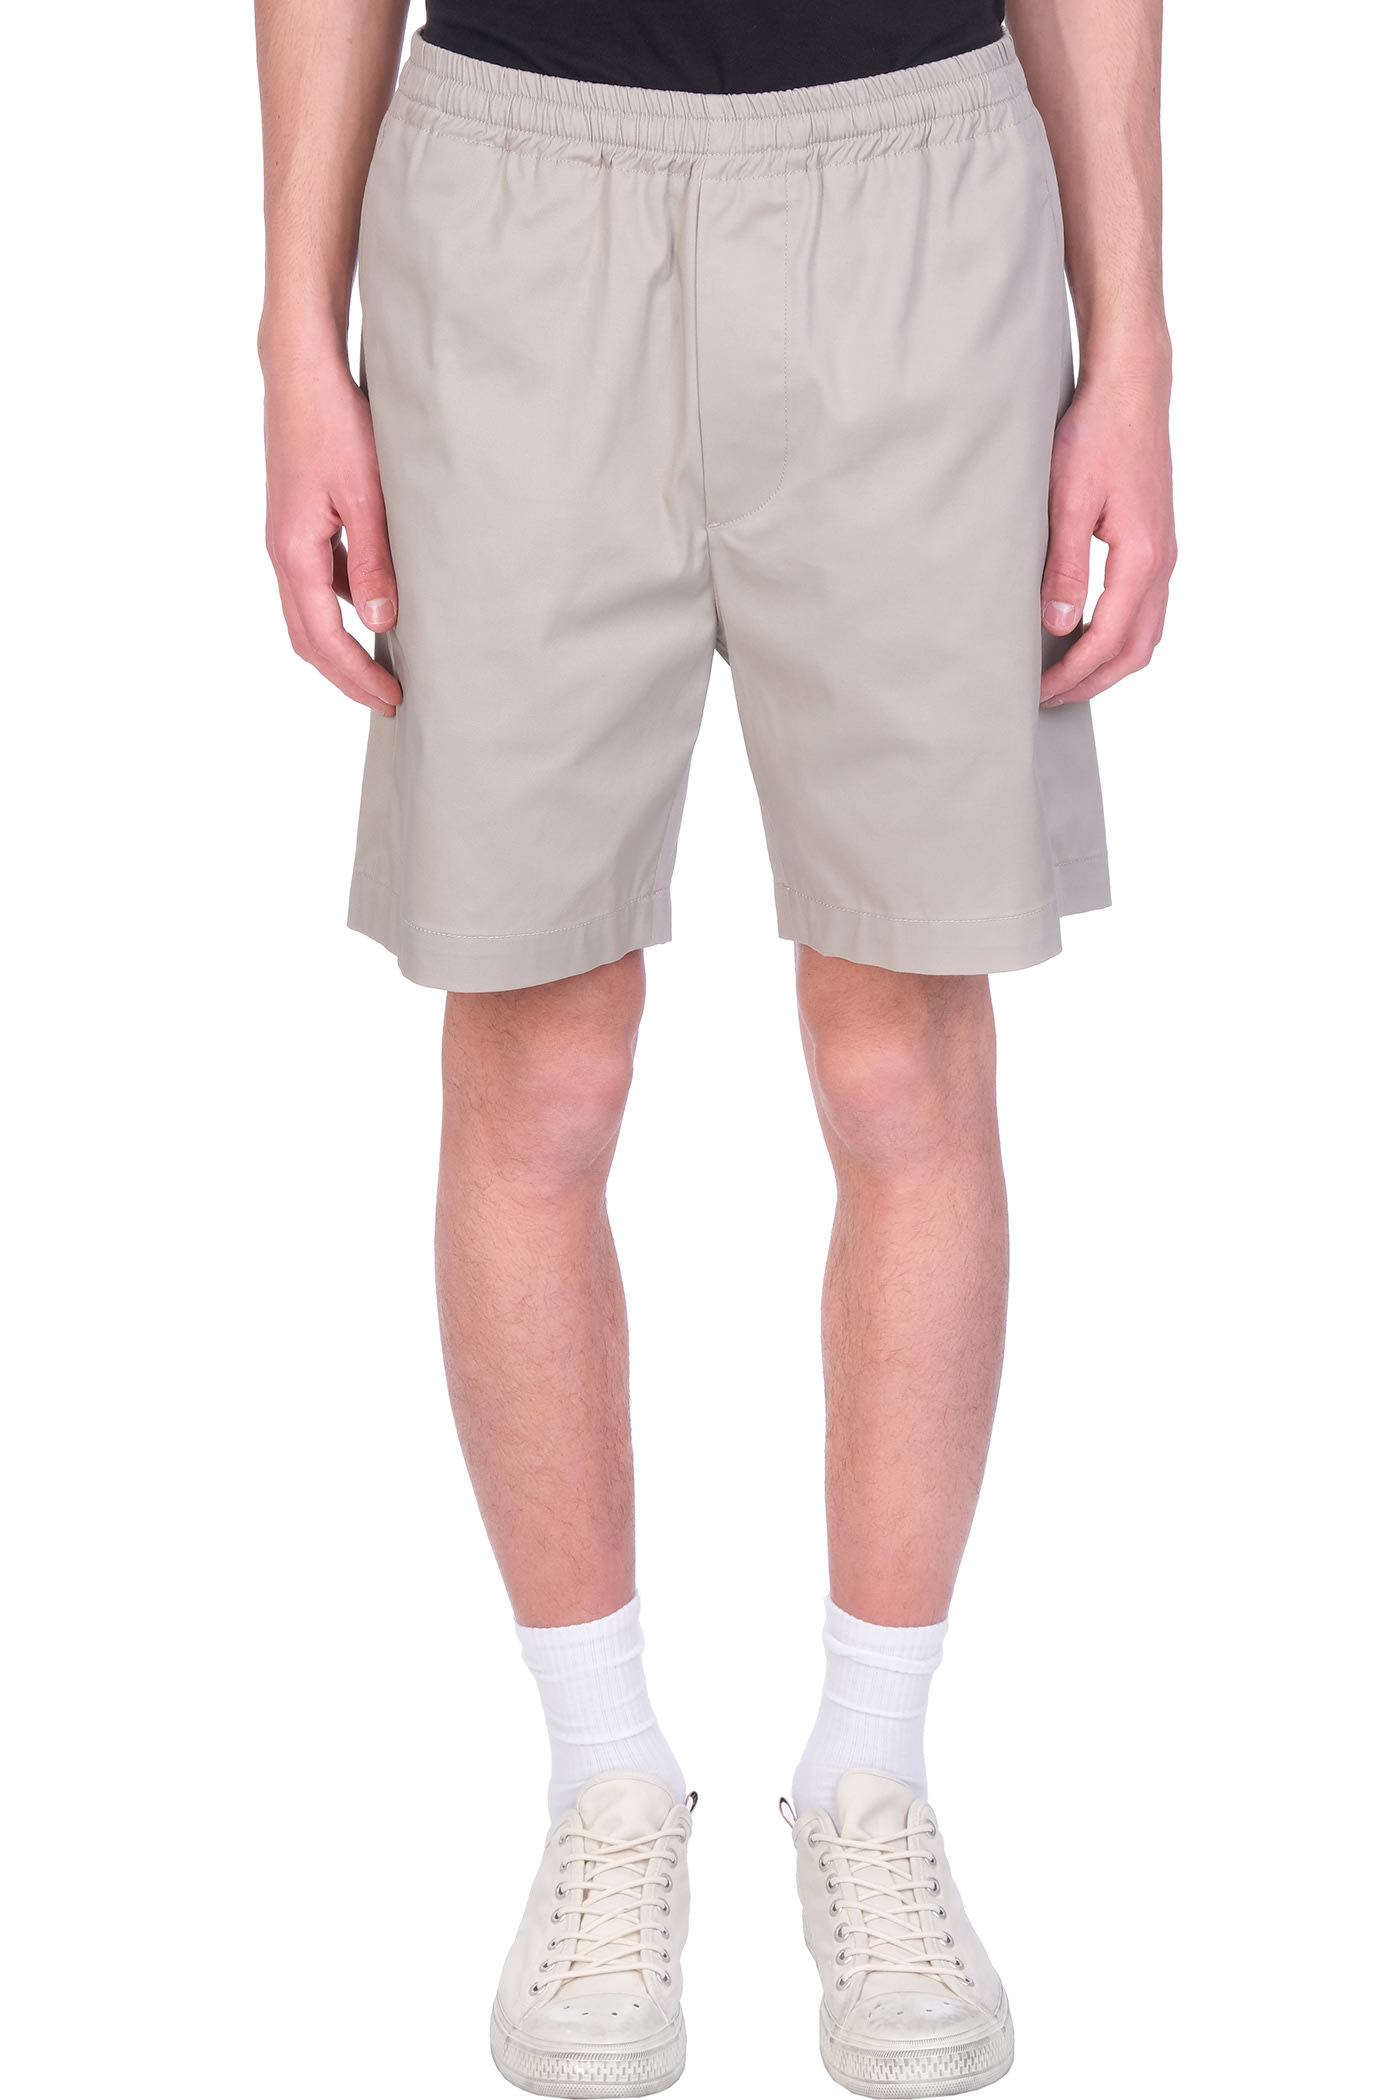 Mauro Grifoni Shorts In Beige Cotton